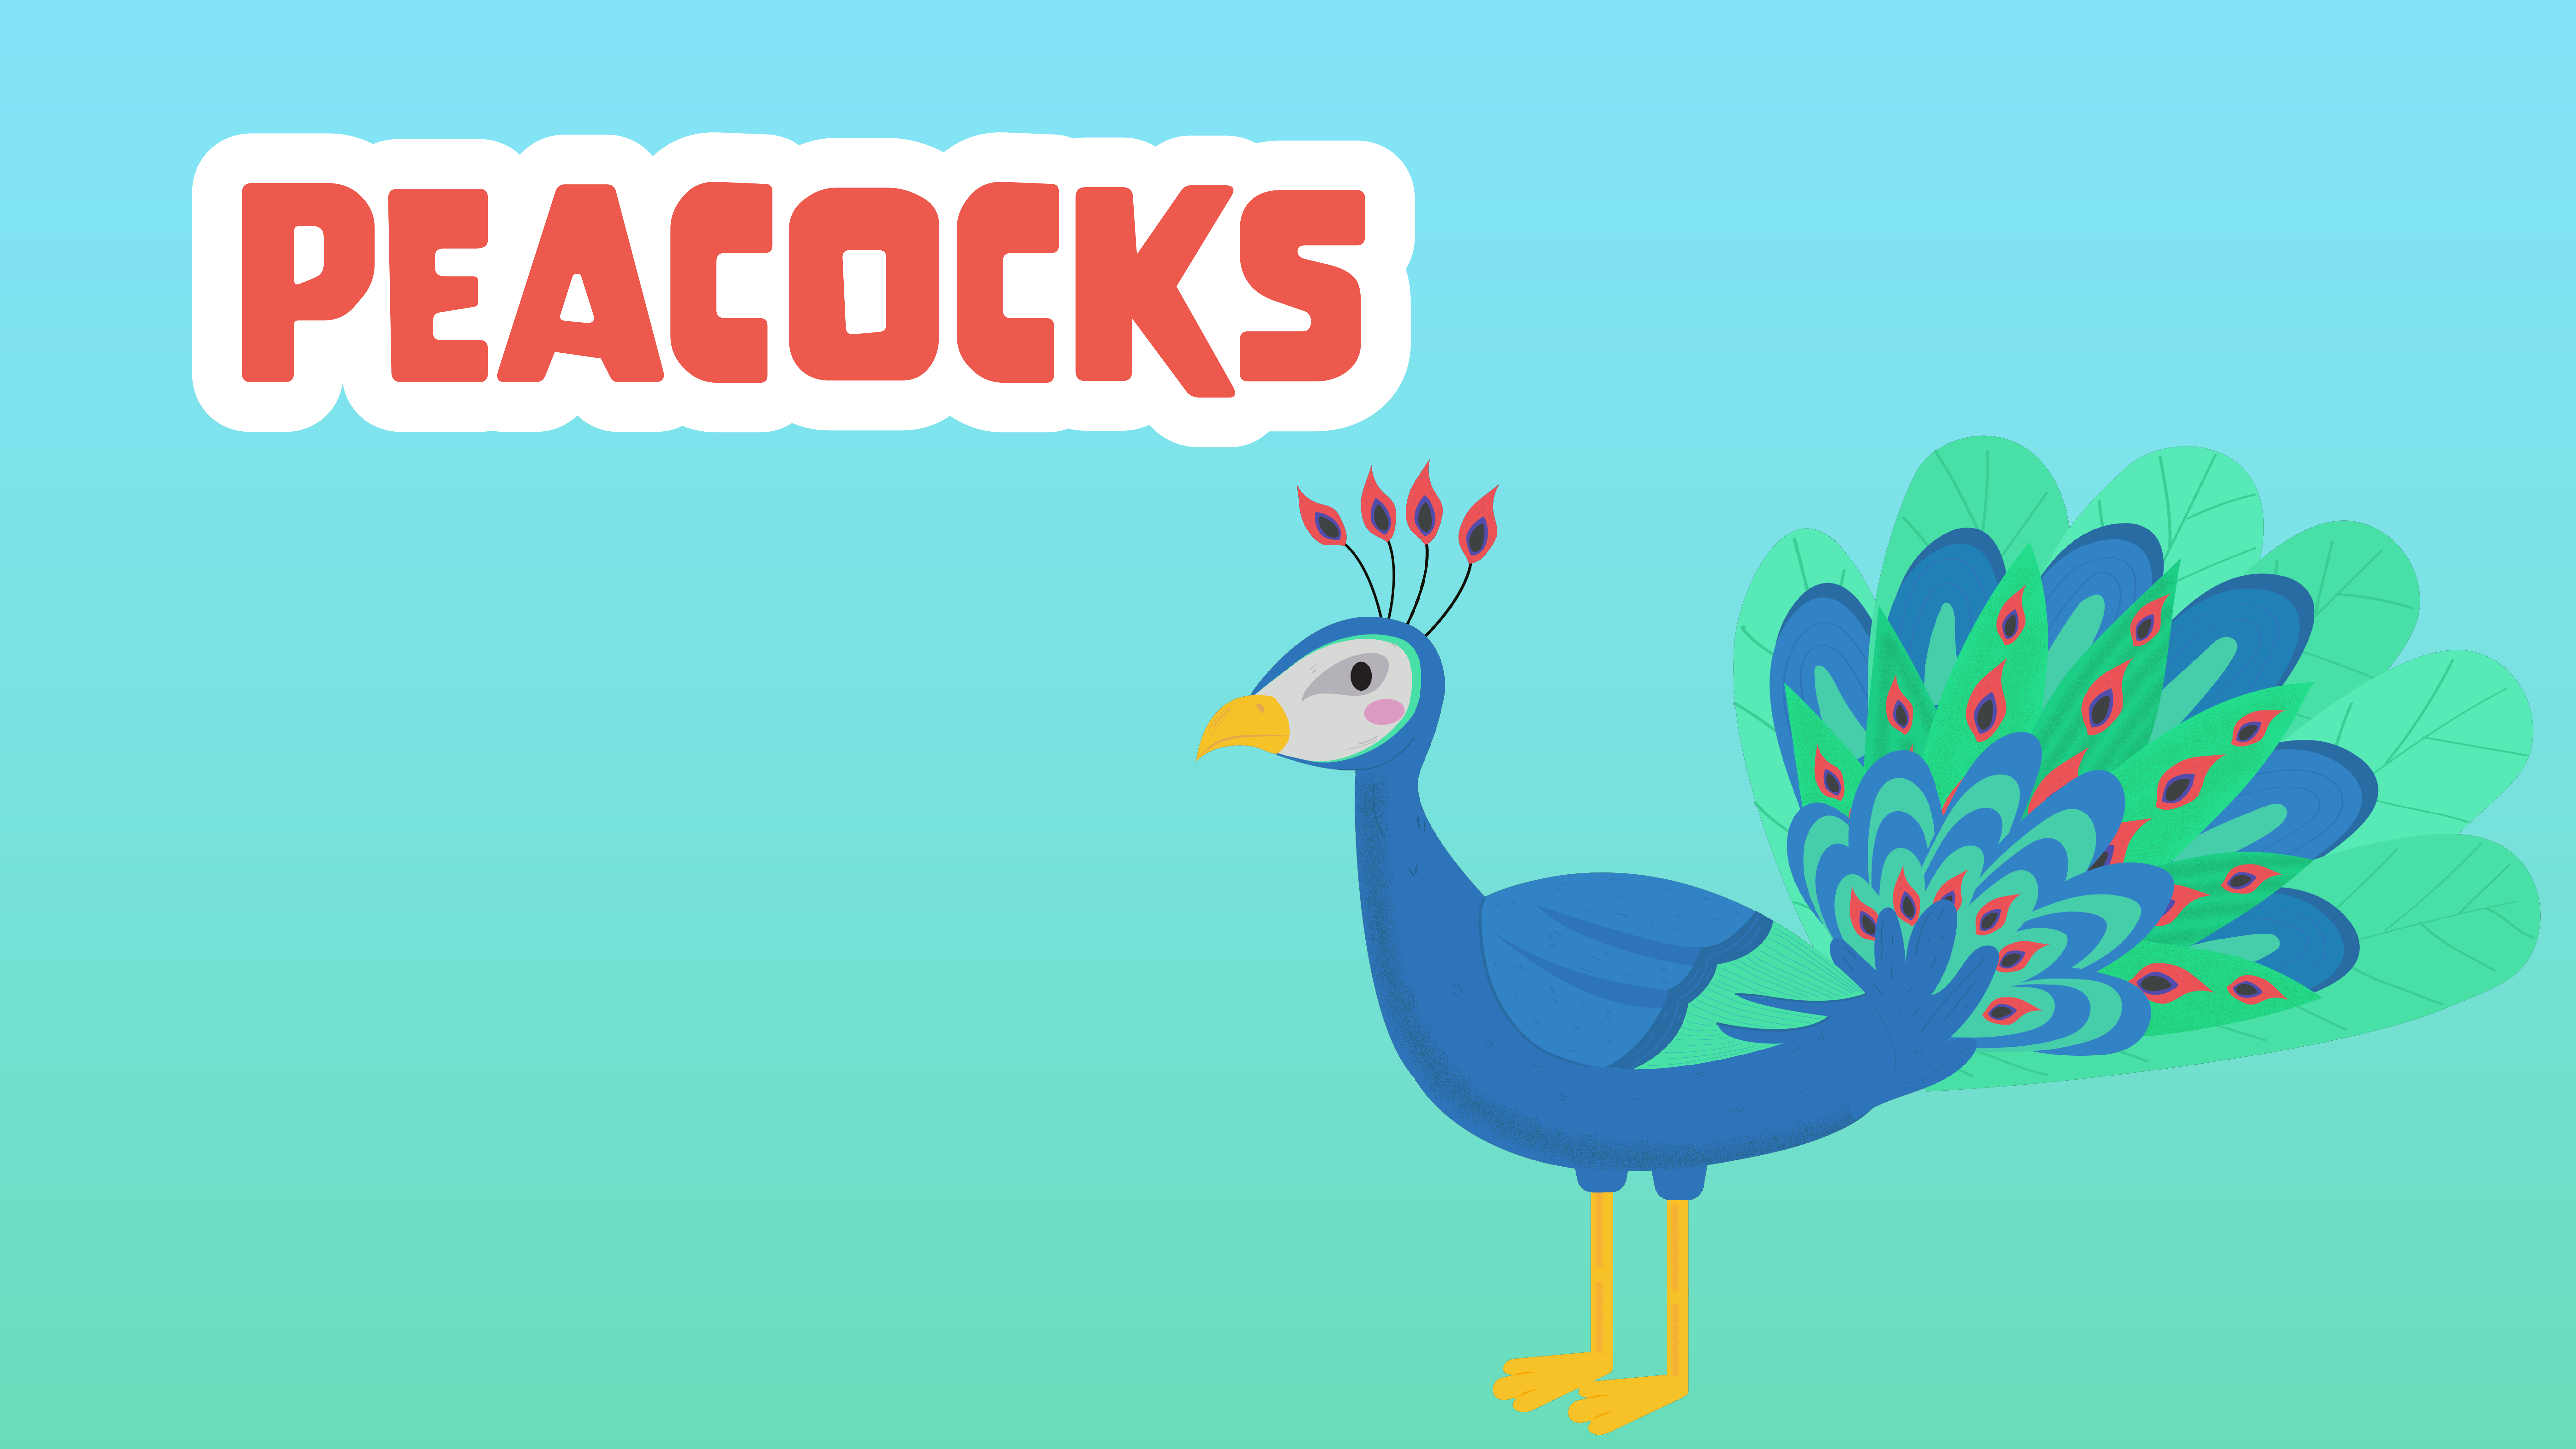 Peacocks Facts for Kids – 5 Playful Facts about Peacocks